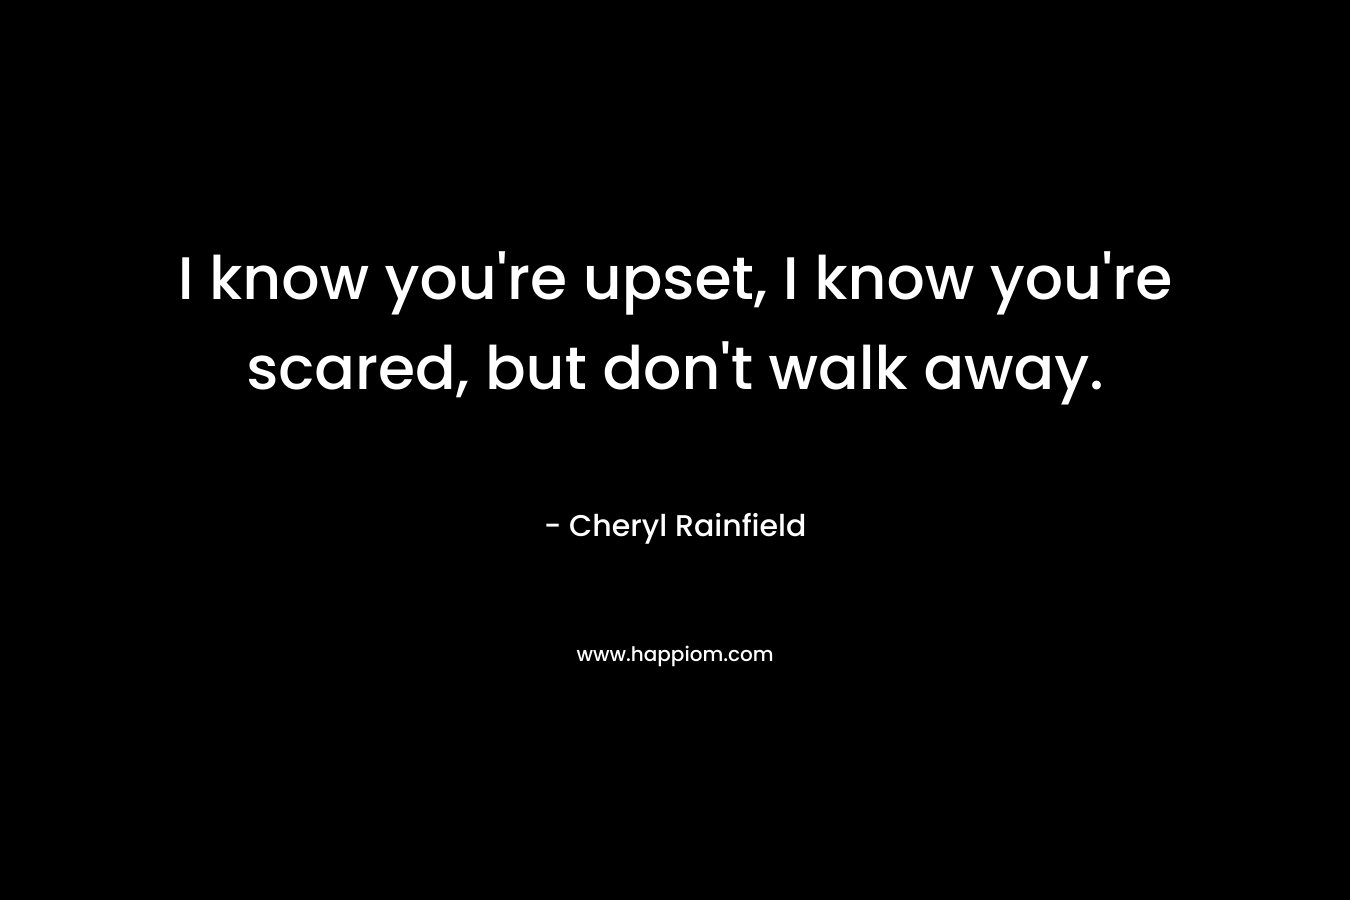 I know you’re upset, I know you’re scared, but don’t walk away. – Cheryl Rainfield